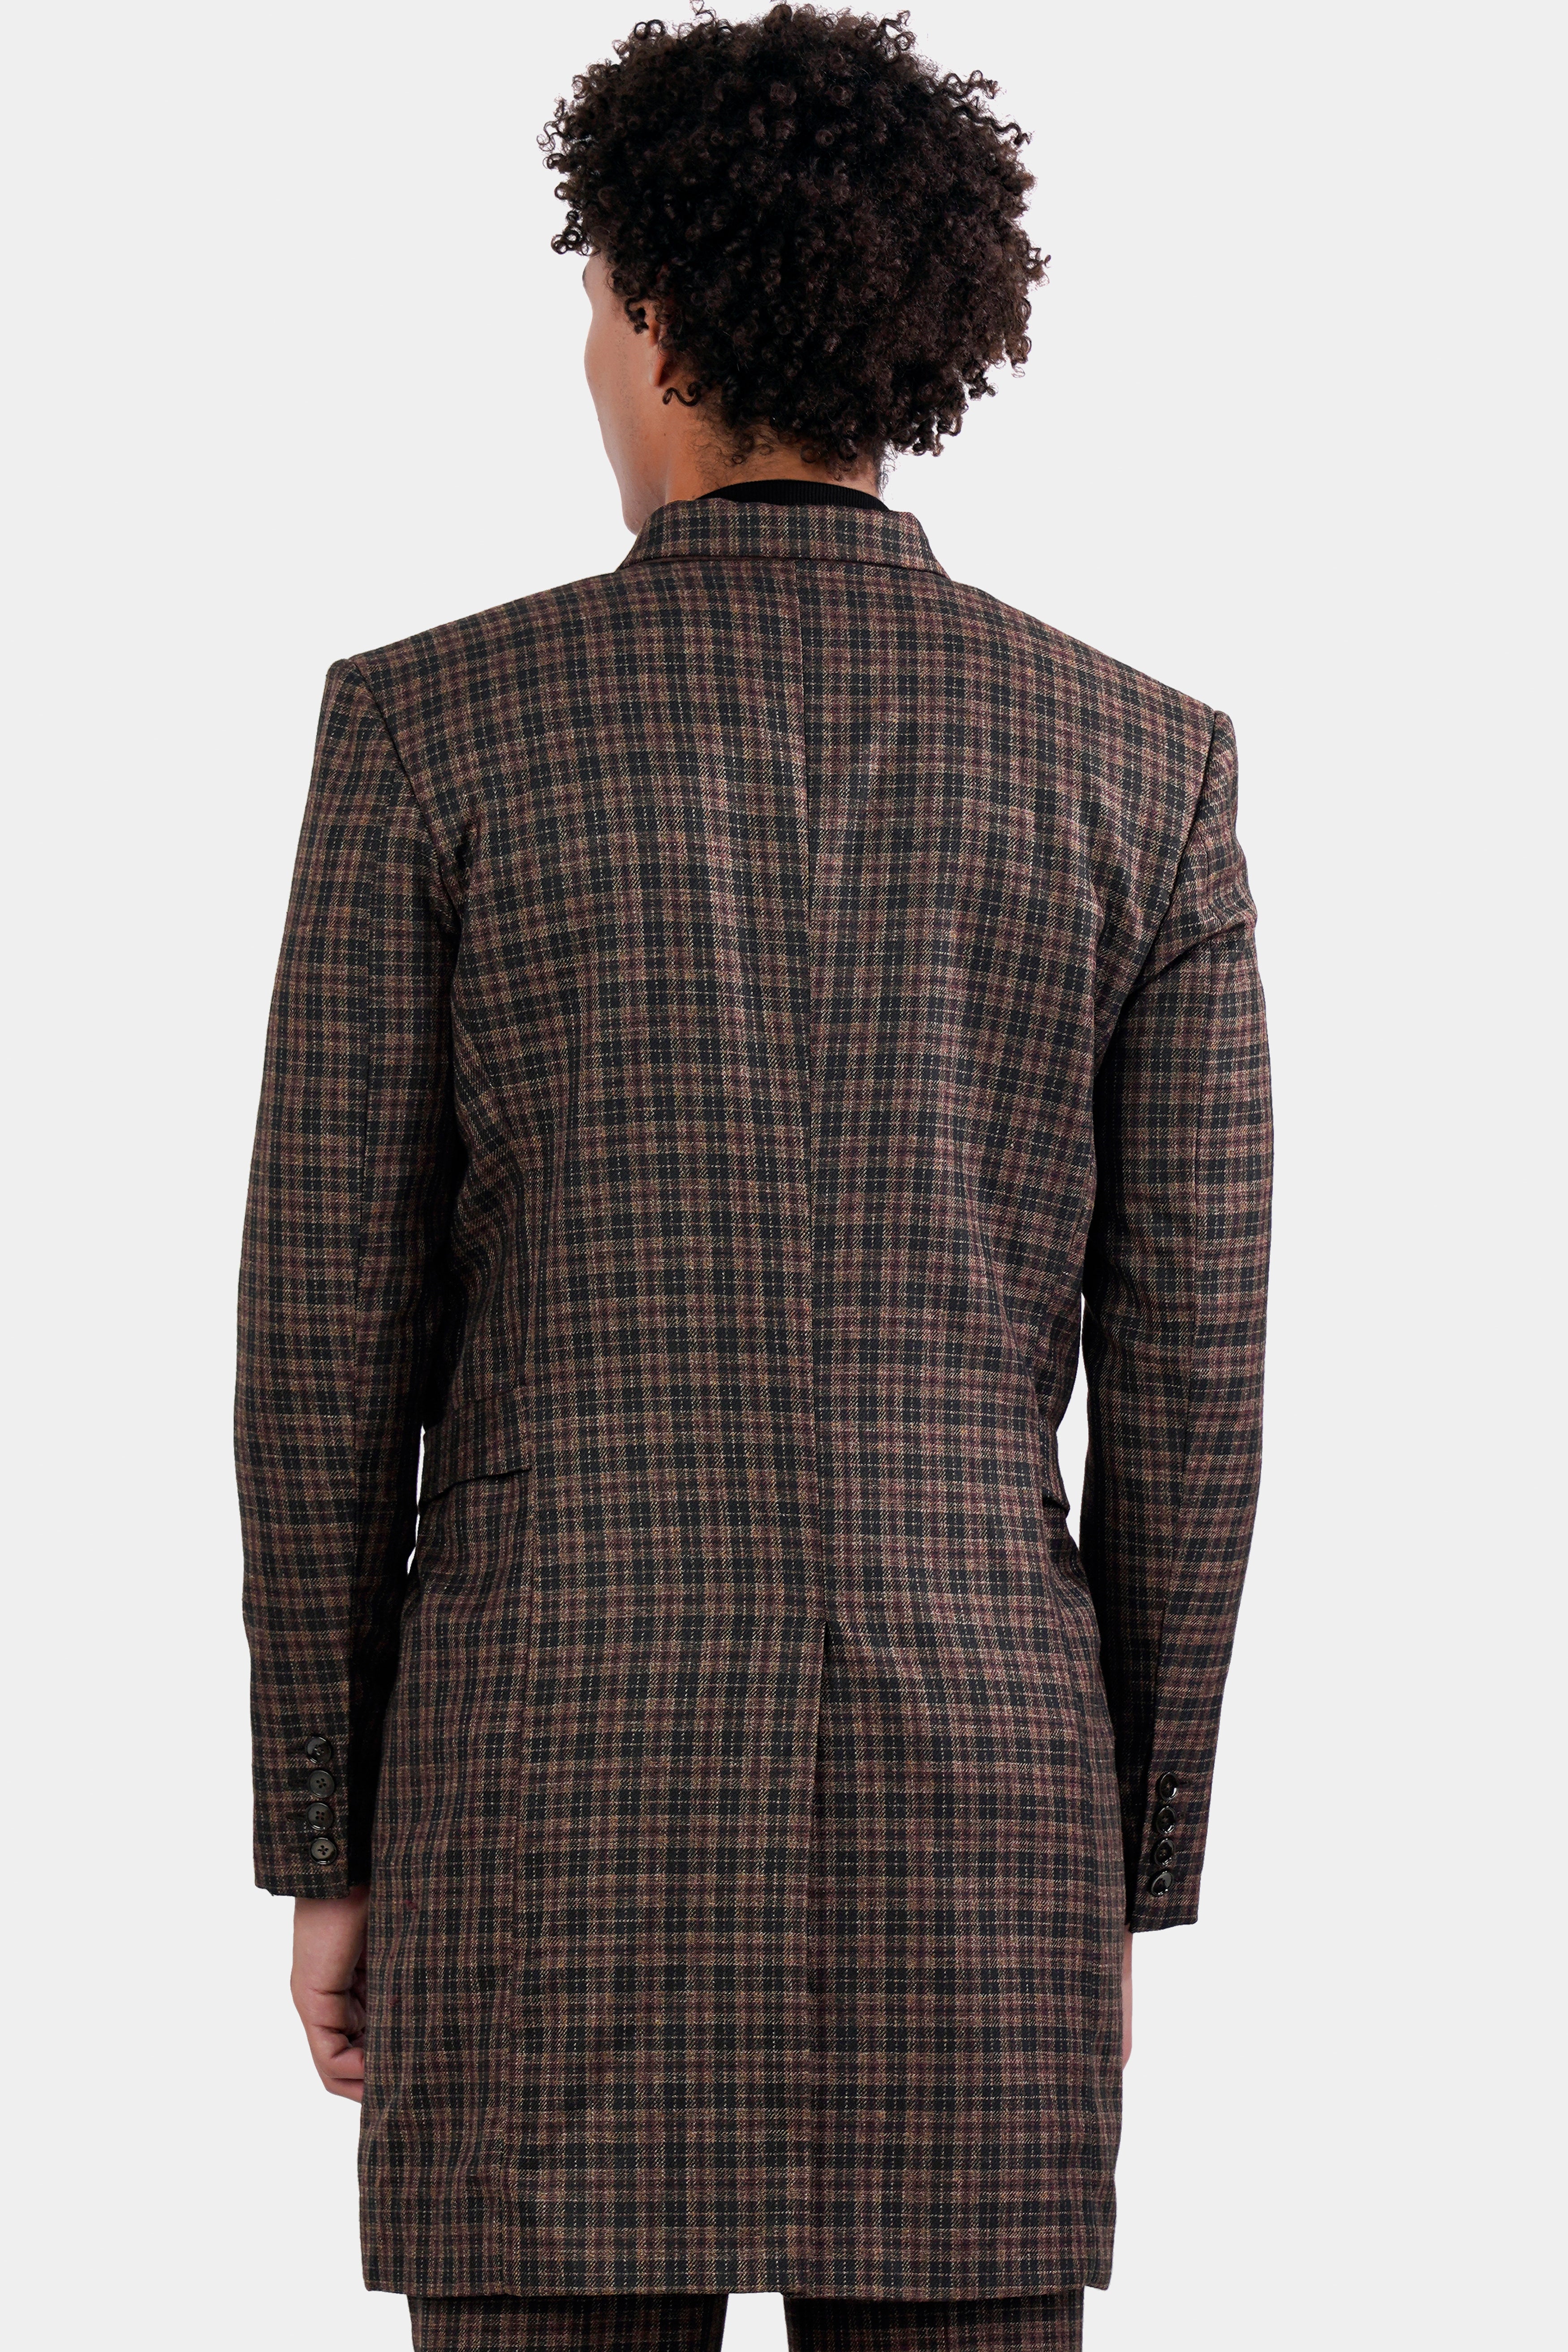 Ferra Brown and Black Plaid Tweed Double Breasted Designer Trench Coat TCB2917-DB-D1-36, TCB2917-DB-D1-38, TCB2917-DB-D1-40, TCB2917-DB-D1-42, TCB2917-DB-D1-44, TCB2917-DB-D1-46, TCB2917-DB-D1-48, TCB2917-DB-D1-50, TCB2917-DB-D1-52, TCB2917-DB-D1-54, TCB2917-DB-D1-56, TCB2917-DB-D1-58, TCB2917-DB-D1-60